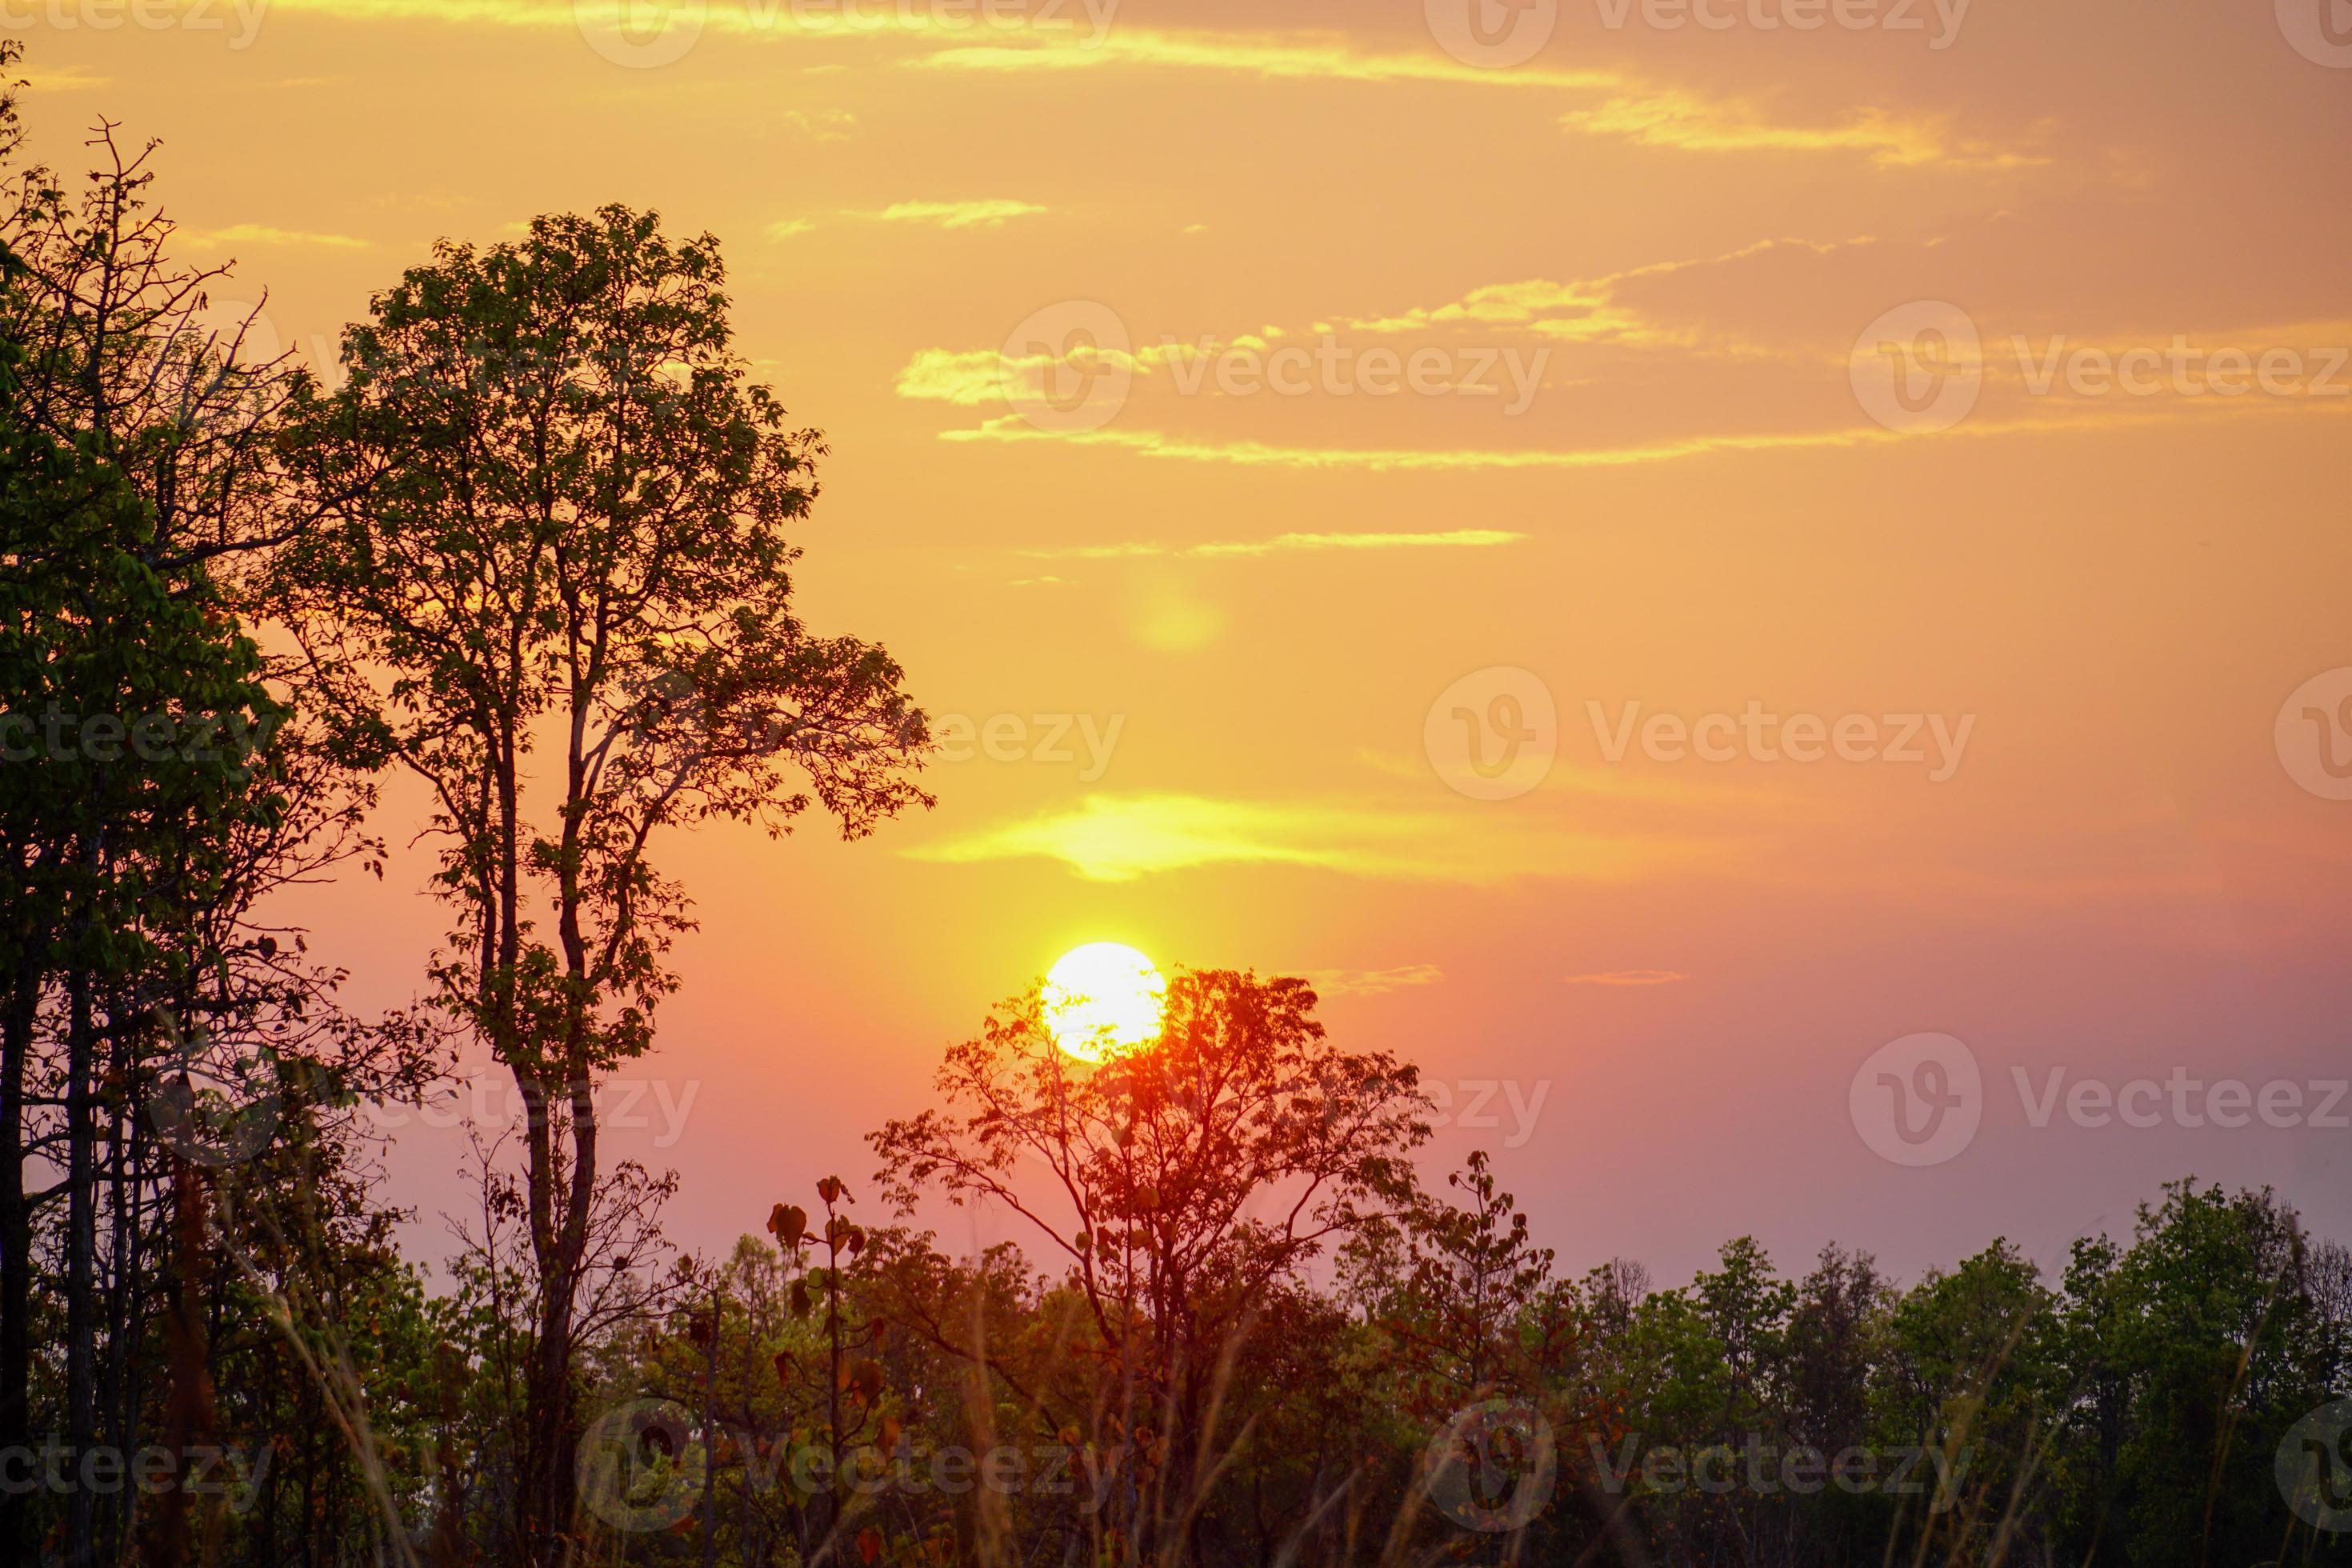 Trees silhouette sunset nature background in the golden hour 3623703 Stock  Photo at Vecteezy